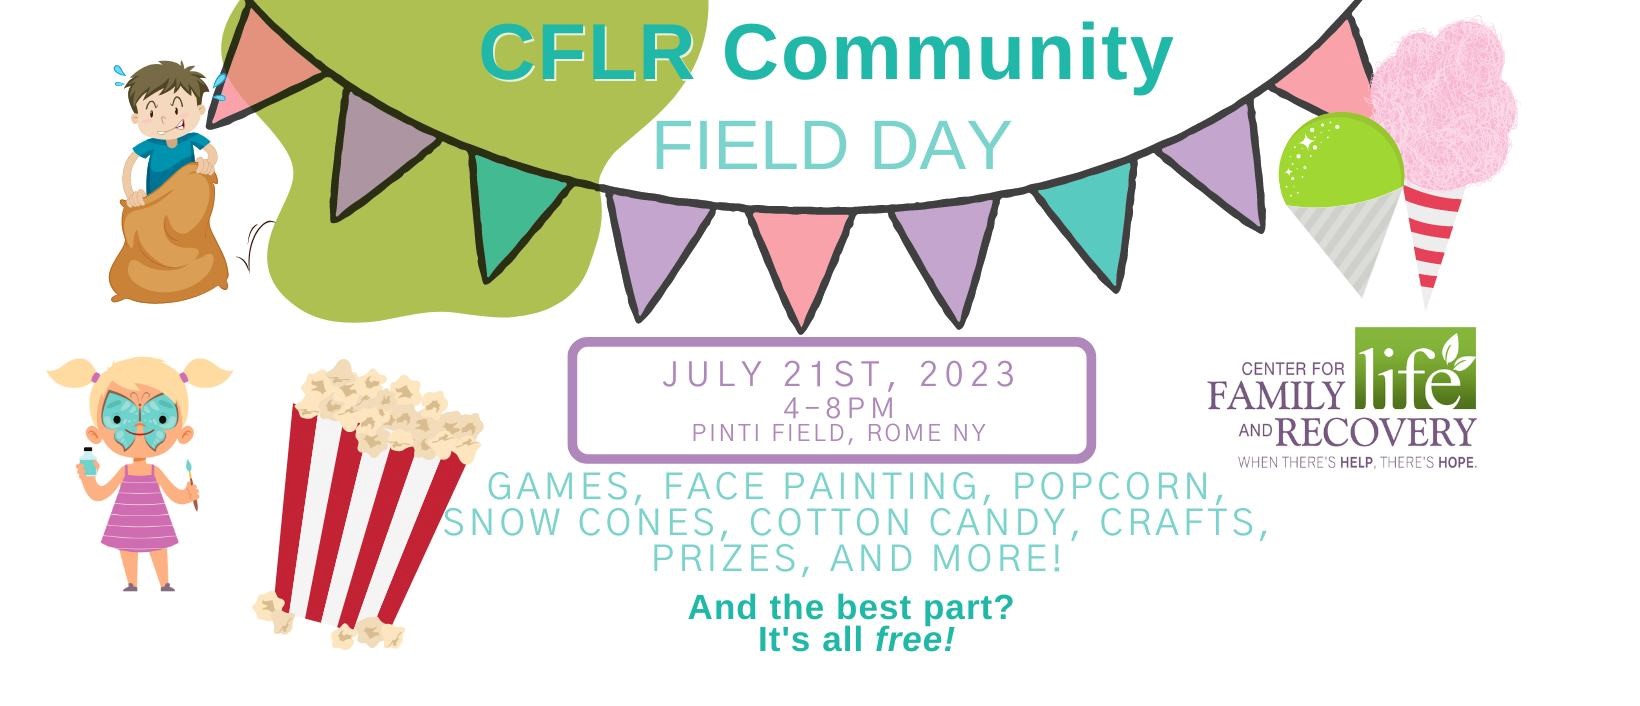 CFLR to Host Recovery Field Day July 21st in Rome